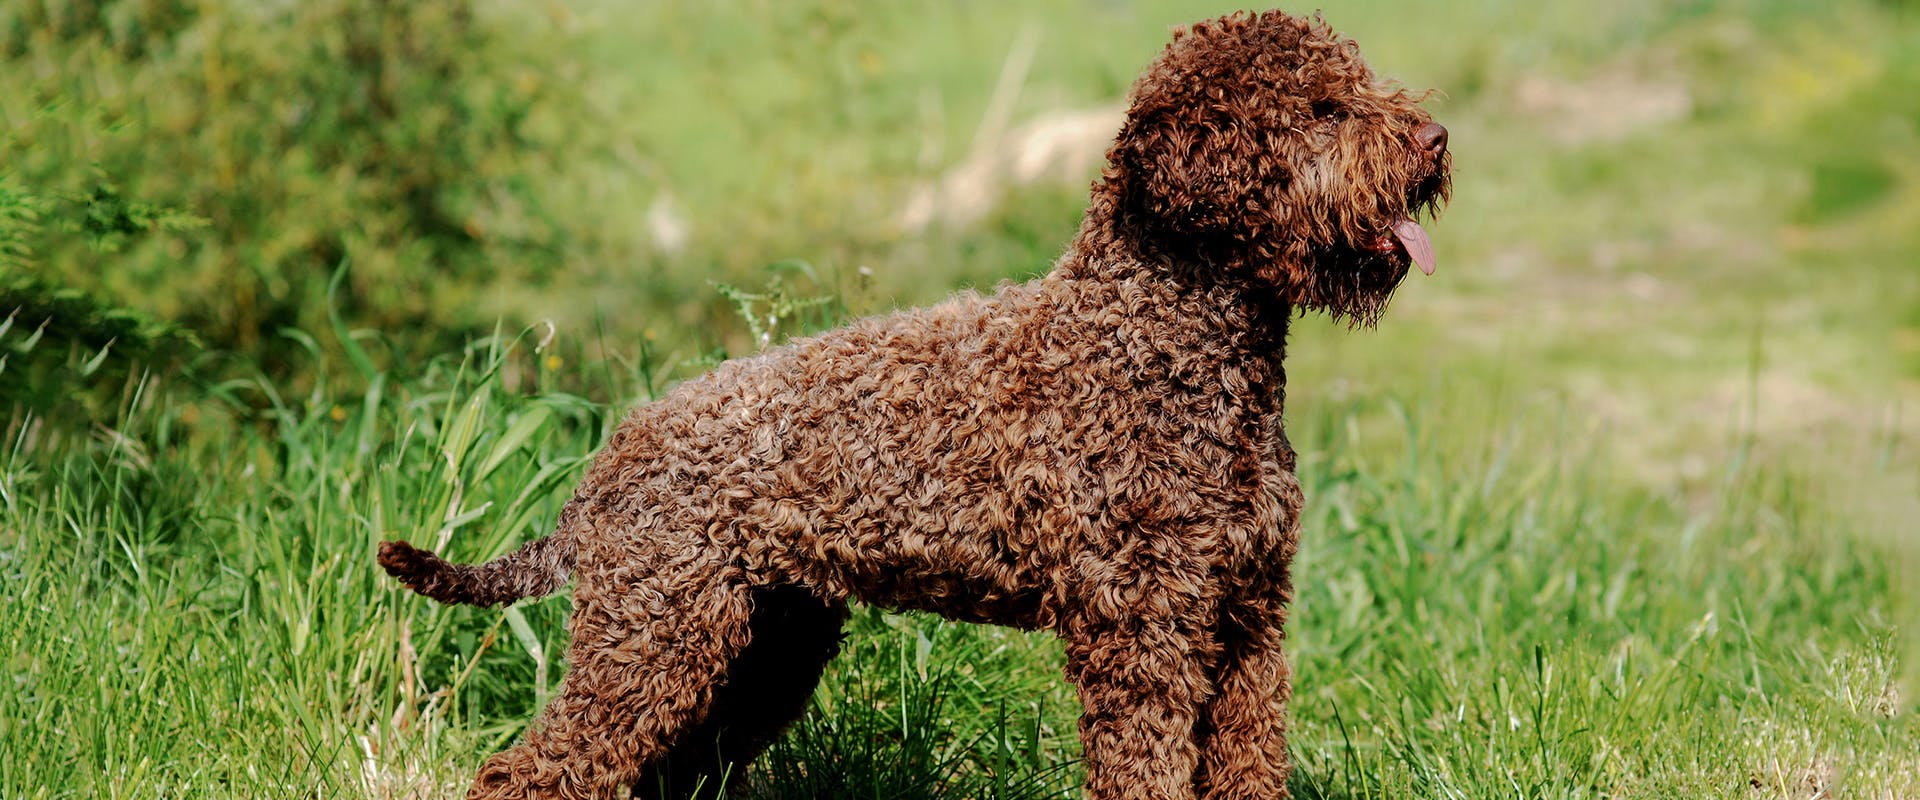 A brown Lagotto Romagnolo dog standing in a field of grass